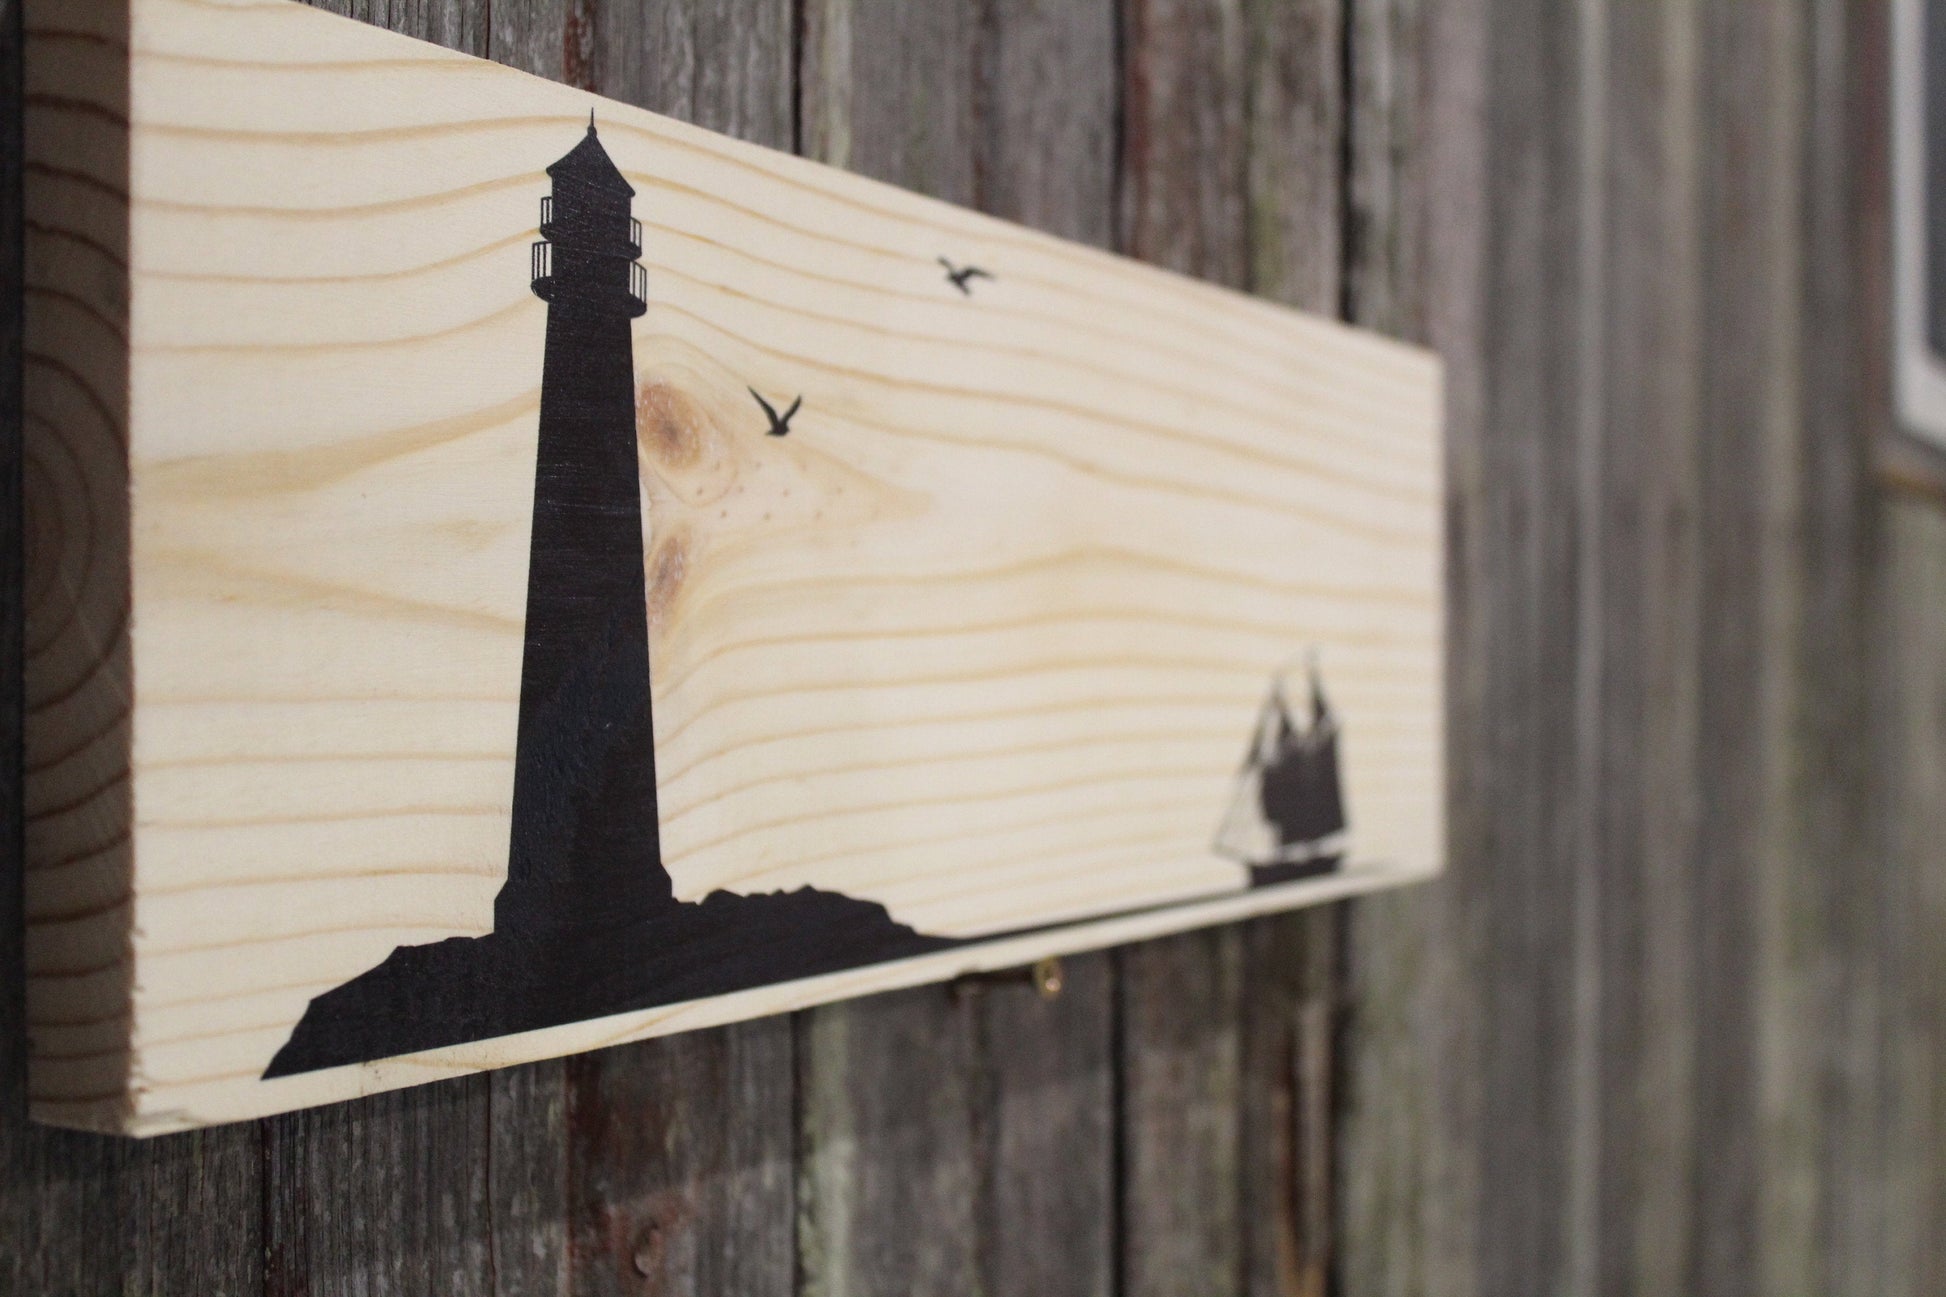 Light House Sail Boat Sign Wall Hanging Silhouette Simple Clean Beach Ocean Rustic Seagulls Sitter Decoration Nautical Wood Print